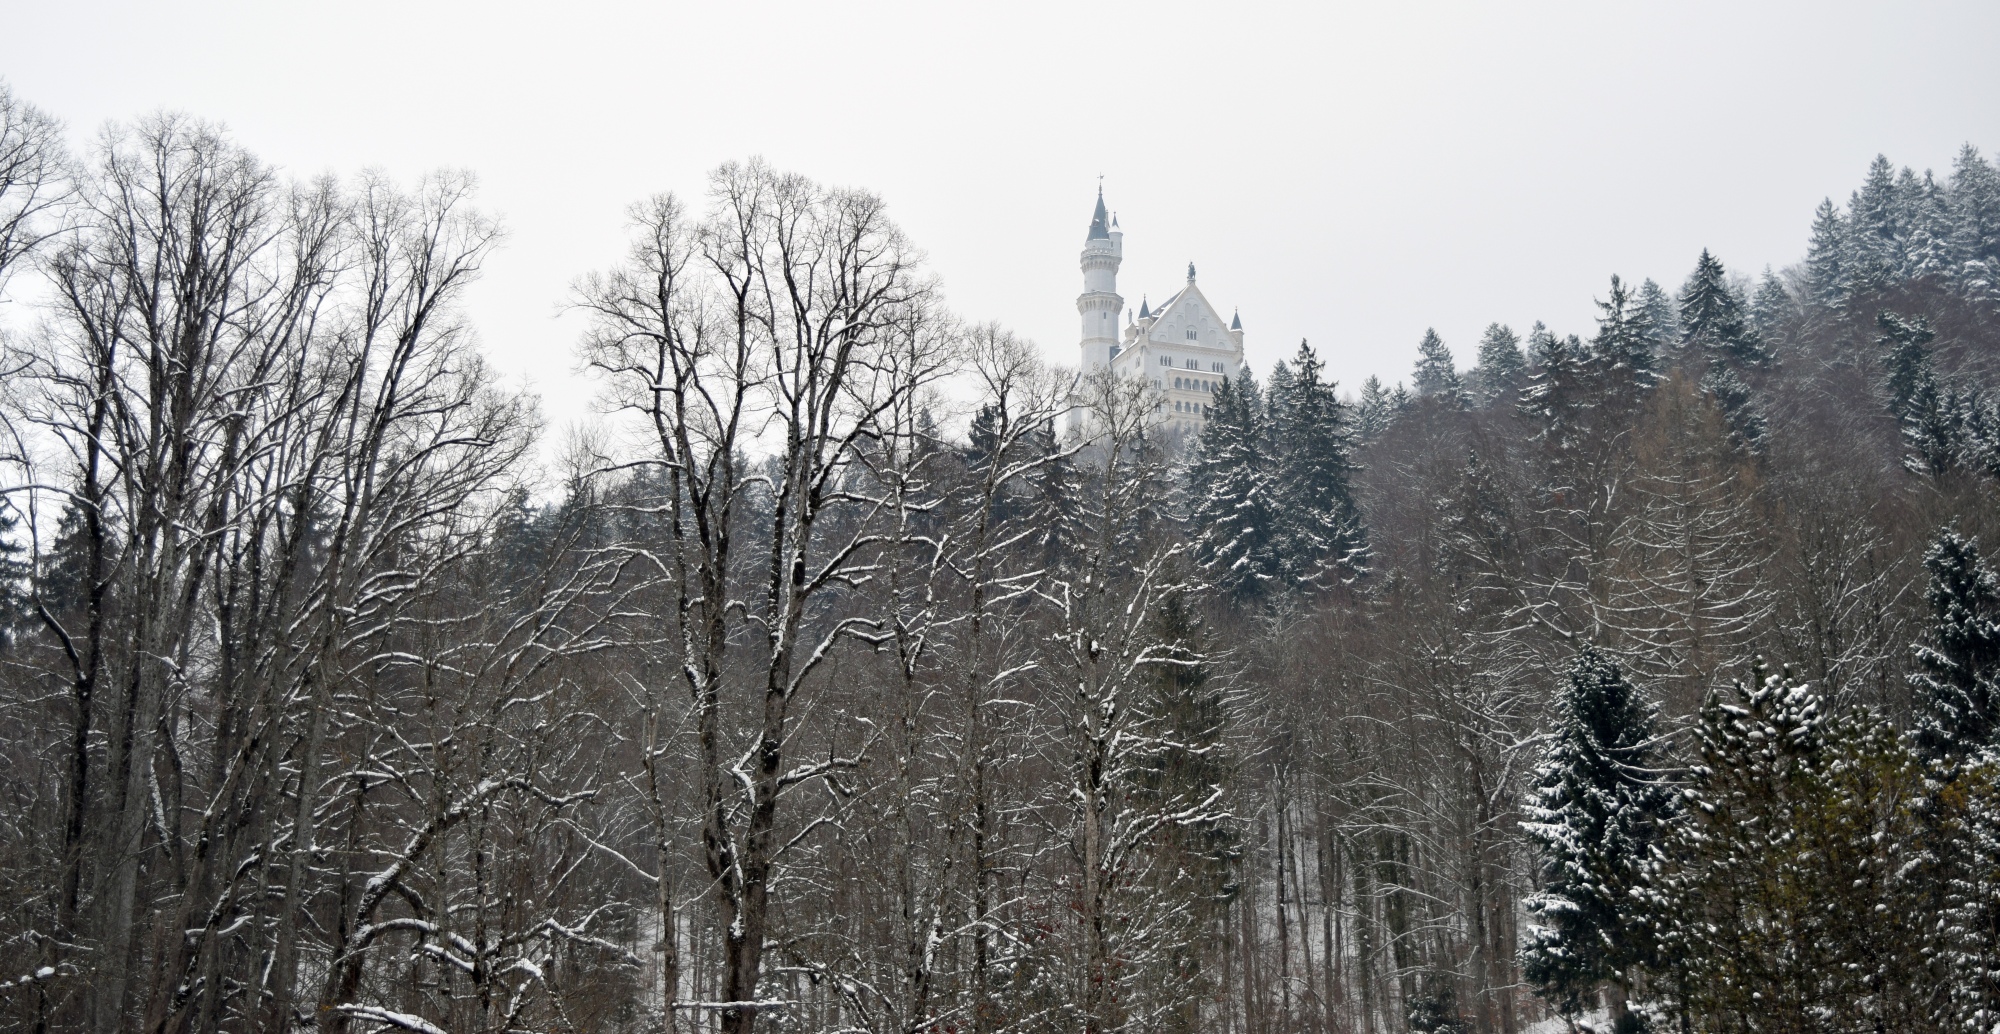 One attempt at getting the best photo of Neuschwanstein Castle. This is a view with the castle peeking out of the top of trees.